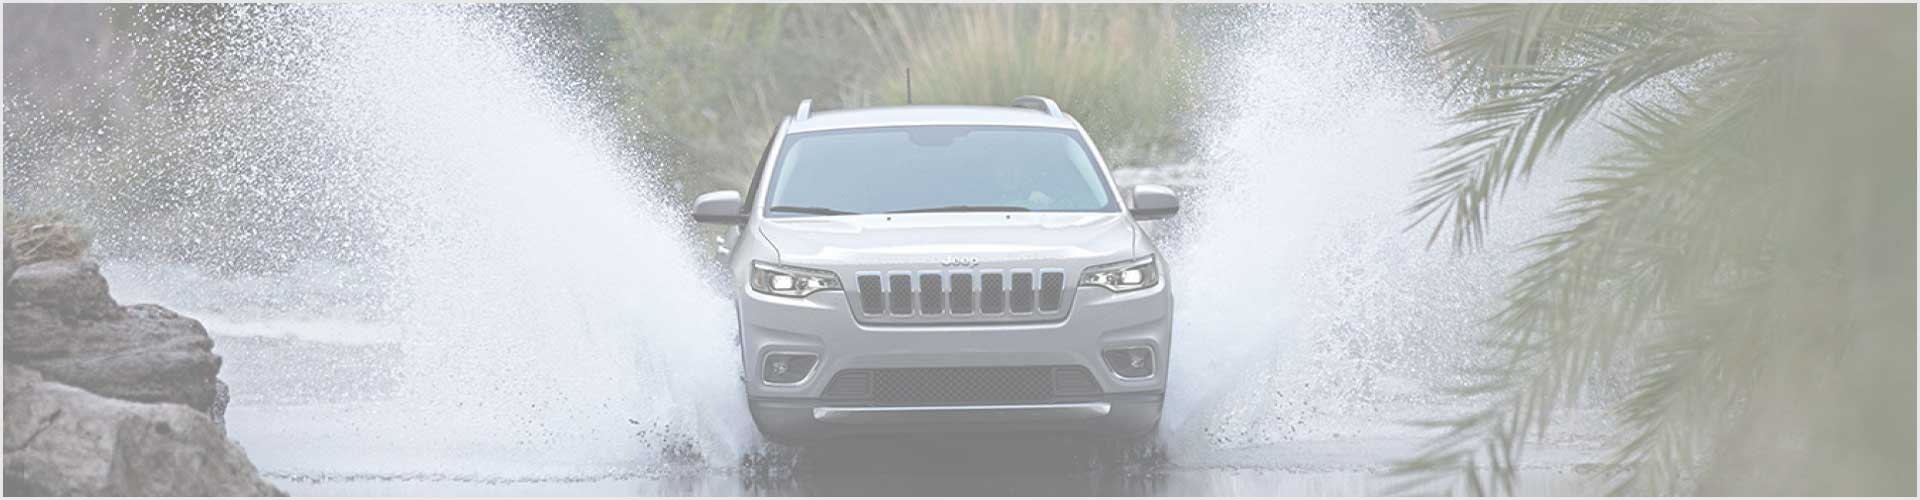 Diehl Chrysler dodge jeep ram of grove city pa diehl automotive new vehicle specials certified pre-owned specials jeep celebration event ram truck month 10 days to deal wrangler friends and family